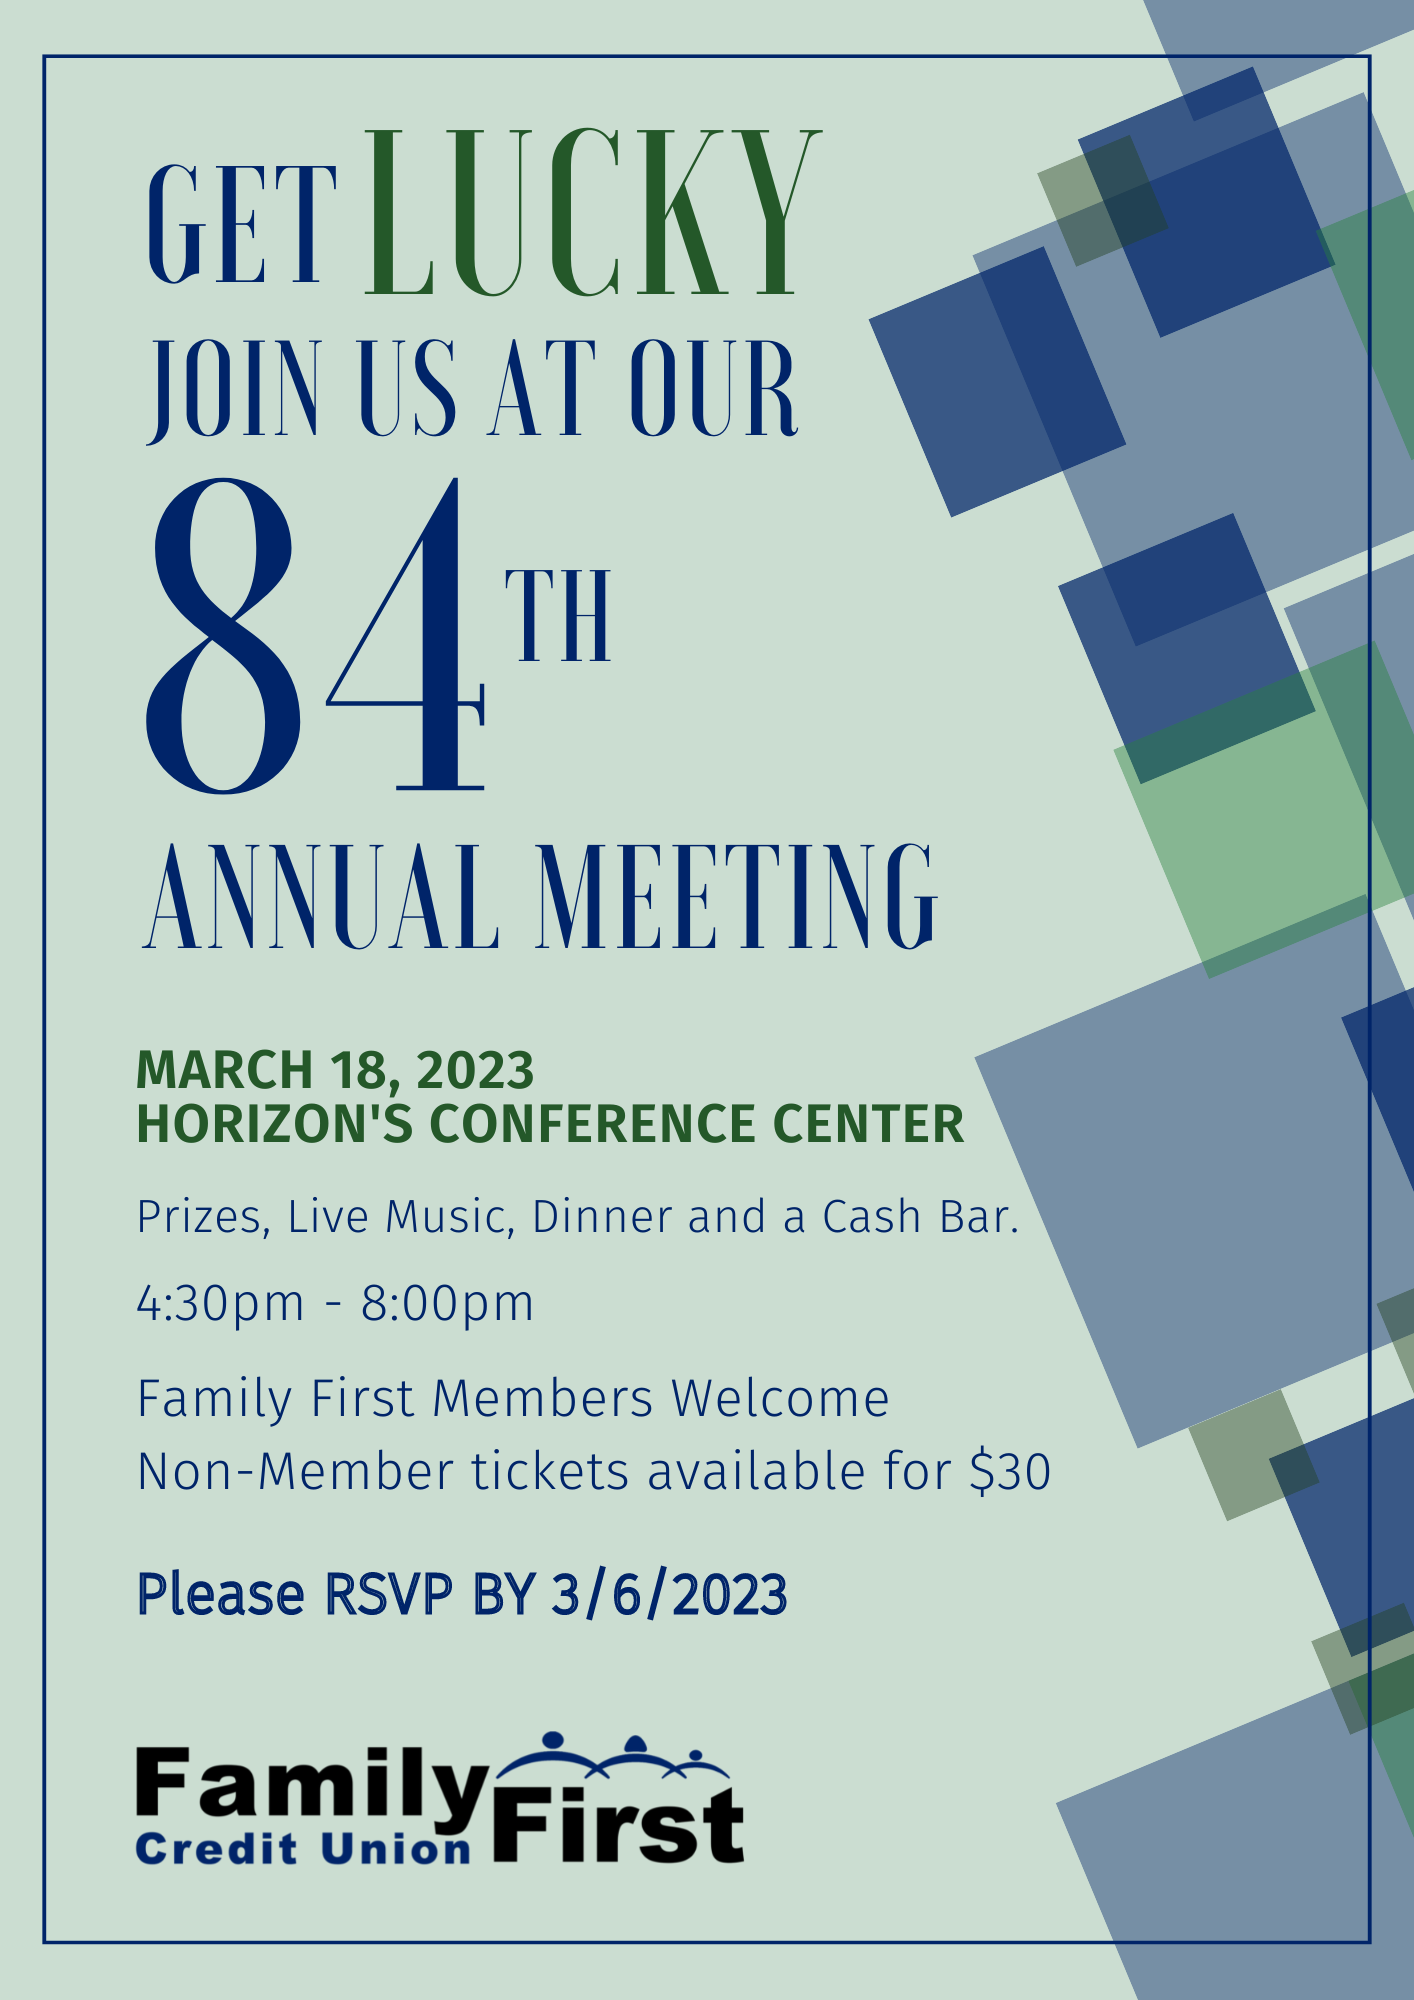 Annual Meeting Invite Flyer